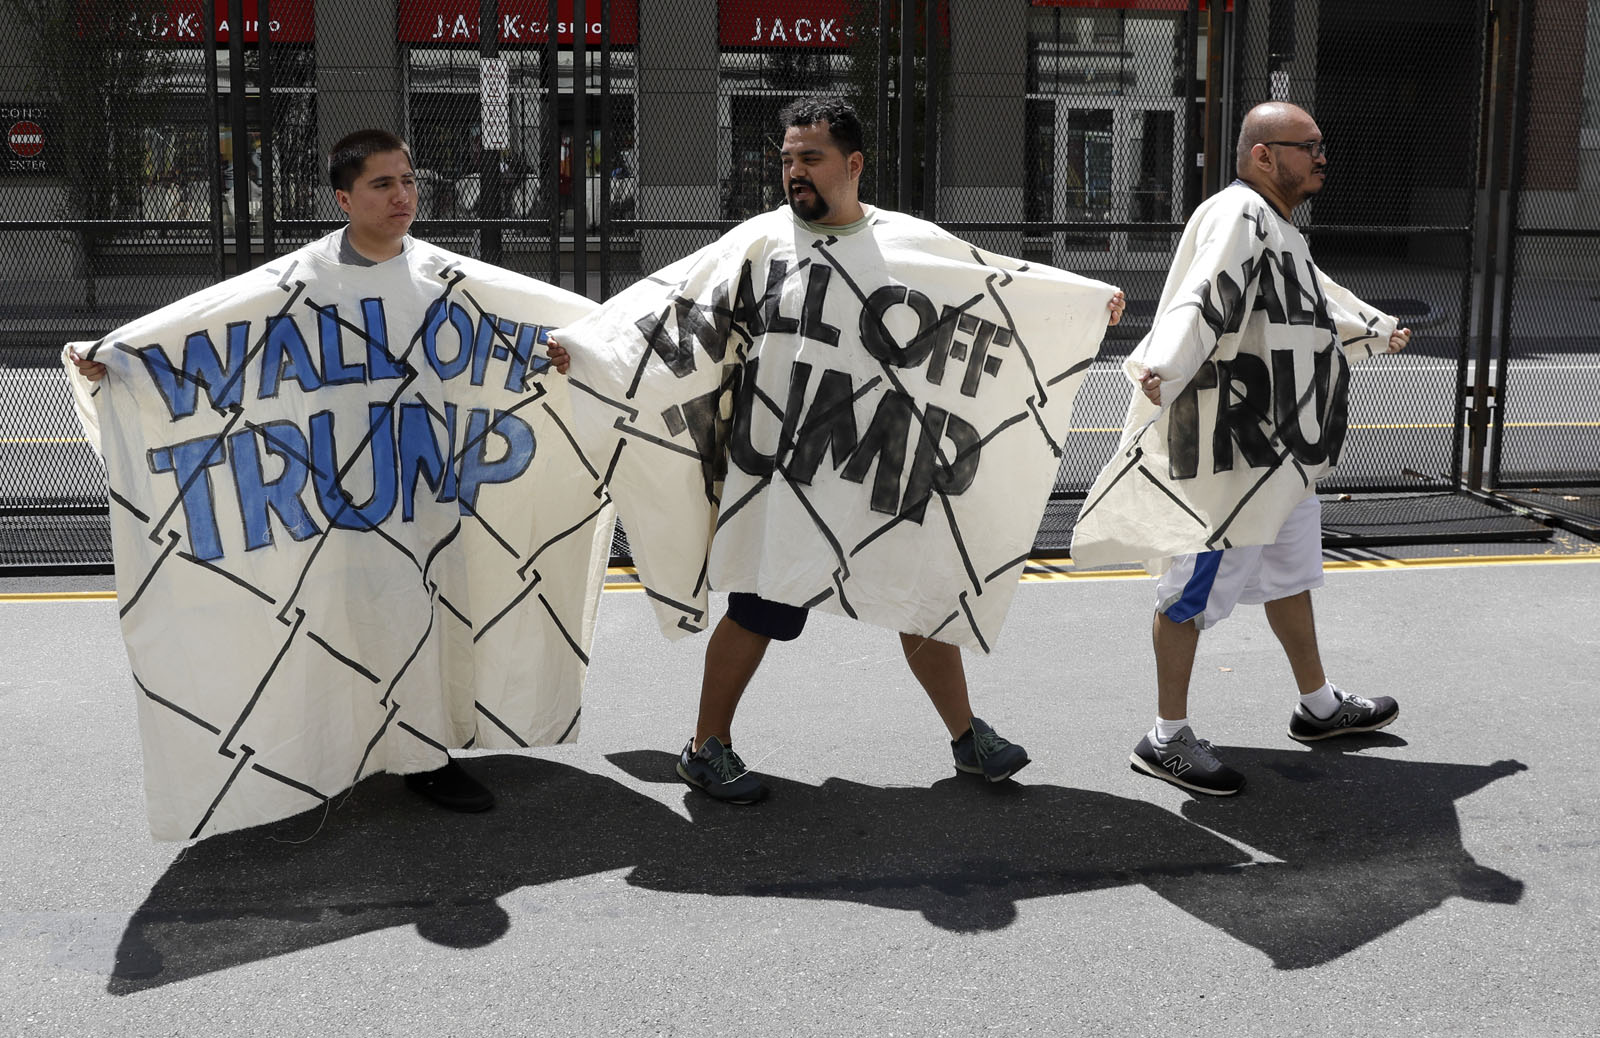 Immigrant rights activists hold up a fabric wall protesting Republican presidential candidate Donald Trump, Wednesday, July 20, 2016, in Cleveland, during the third day of the Republican convention. (AP Photo/Patrick Semansky)